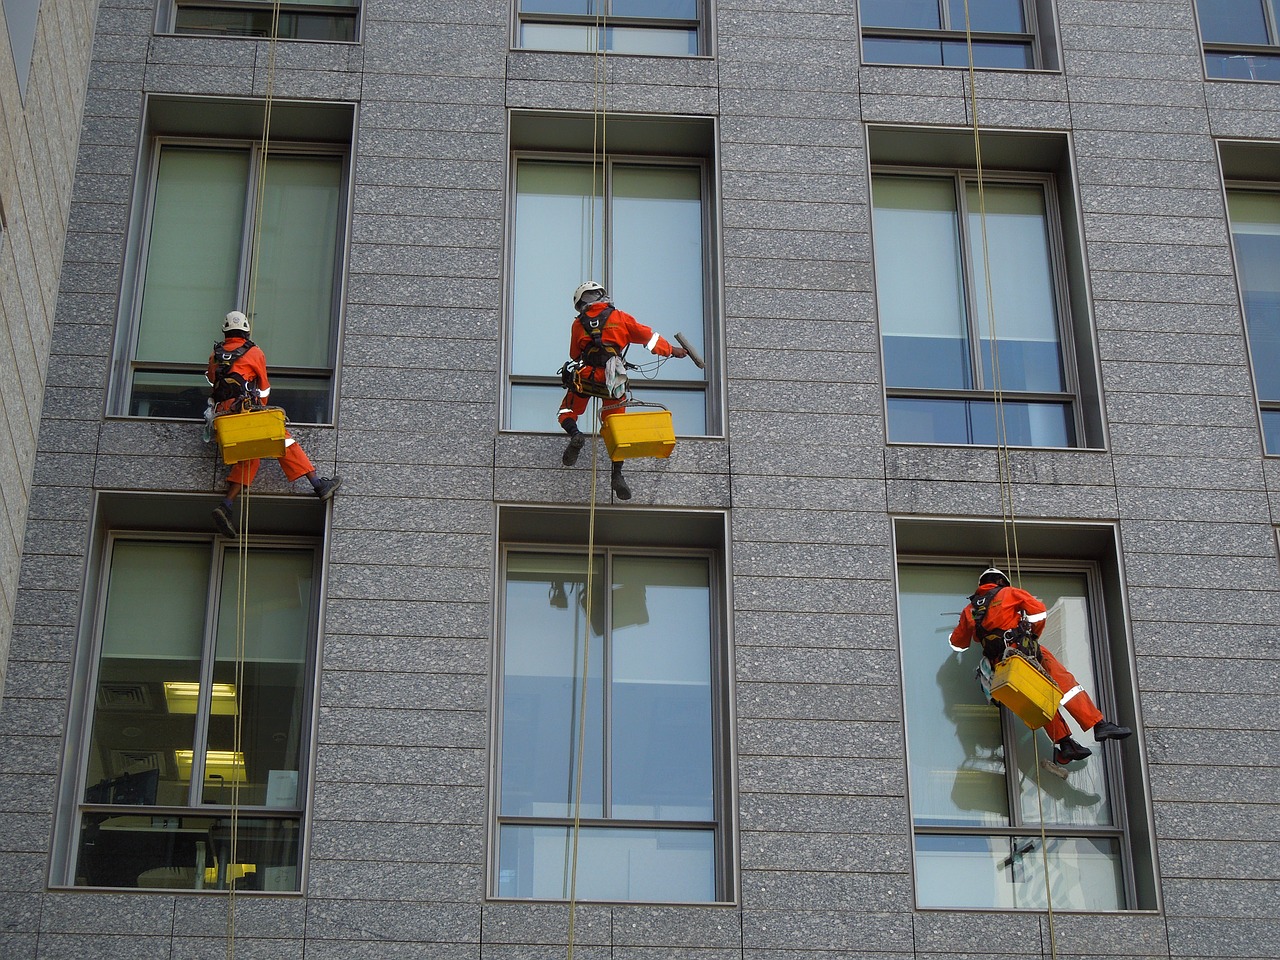 window cleaning services free photo